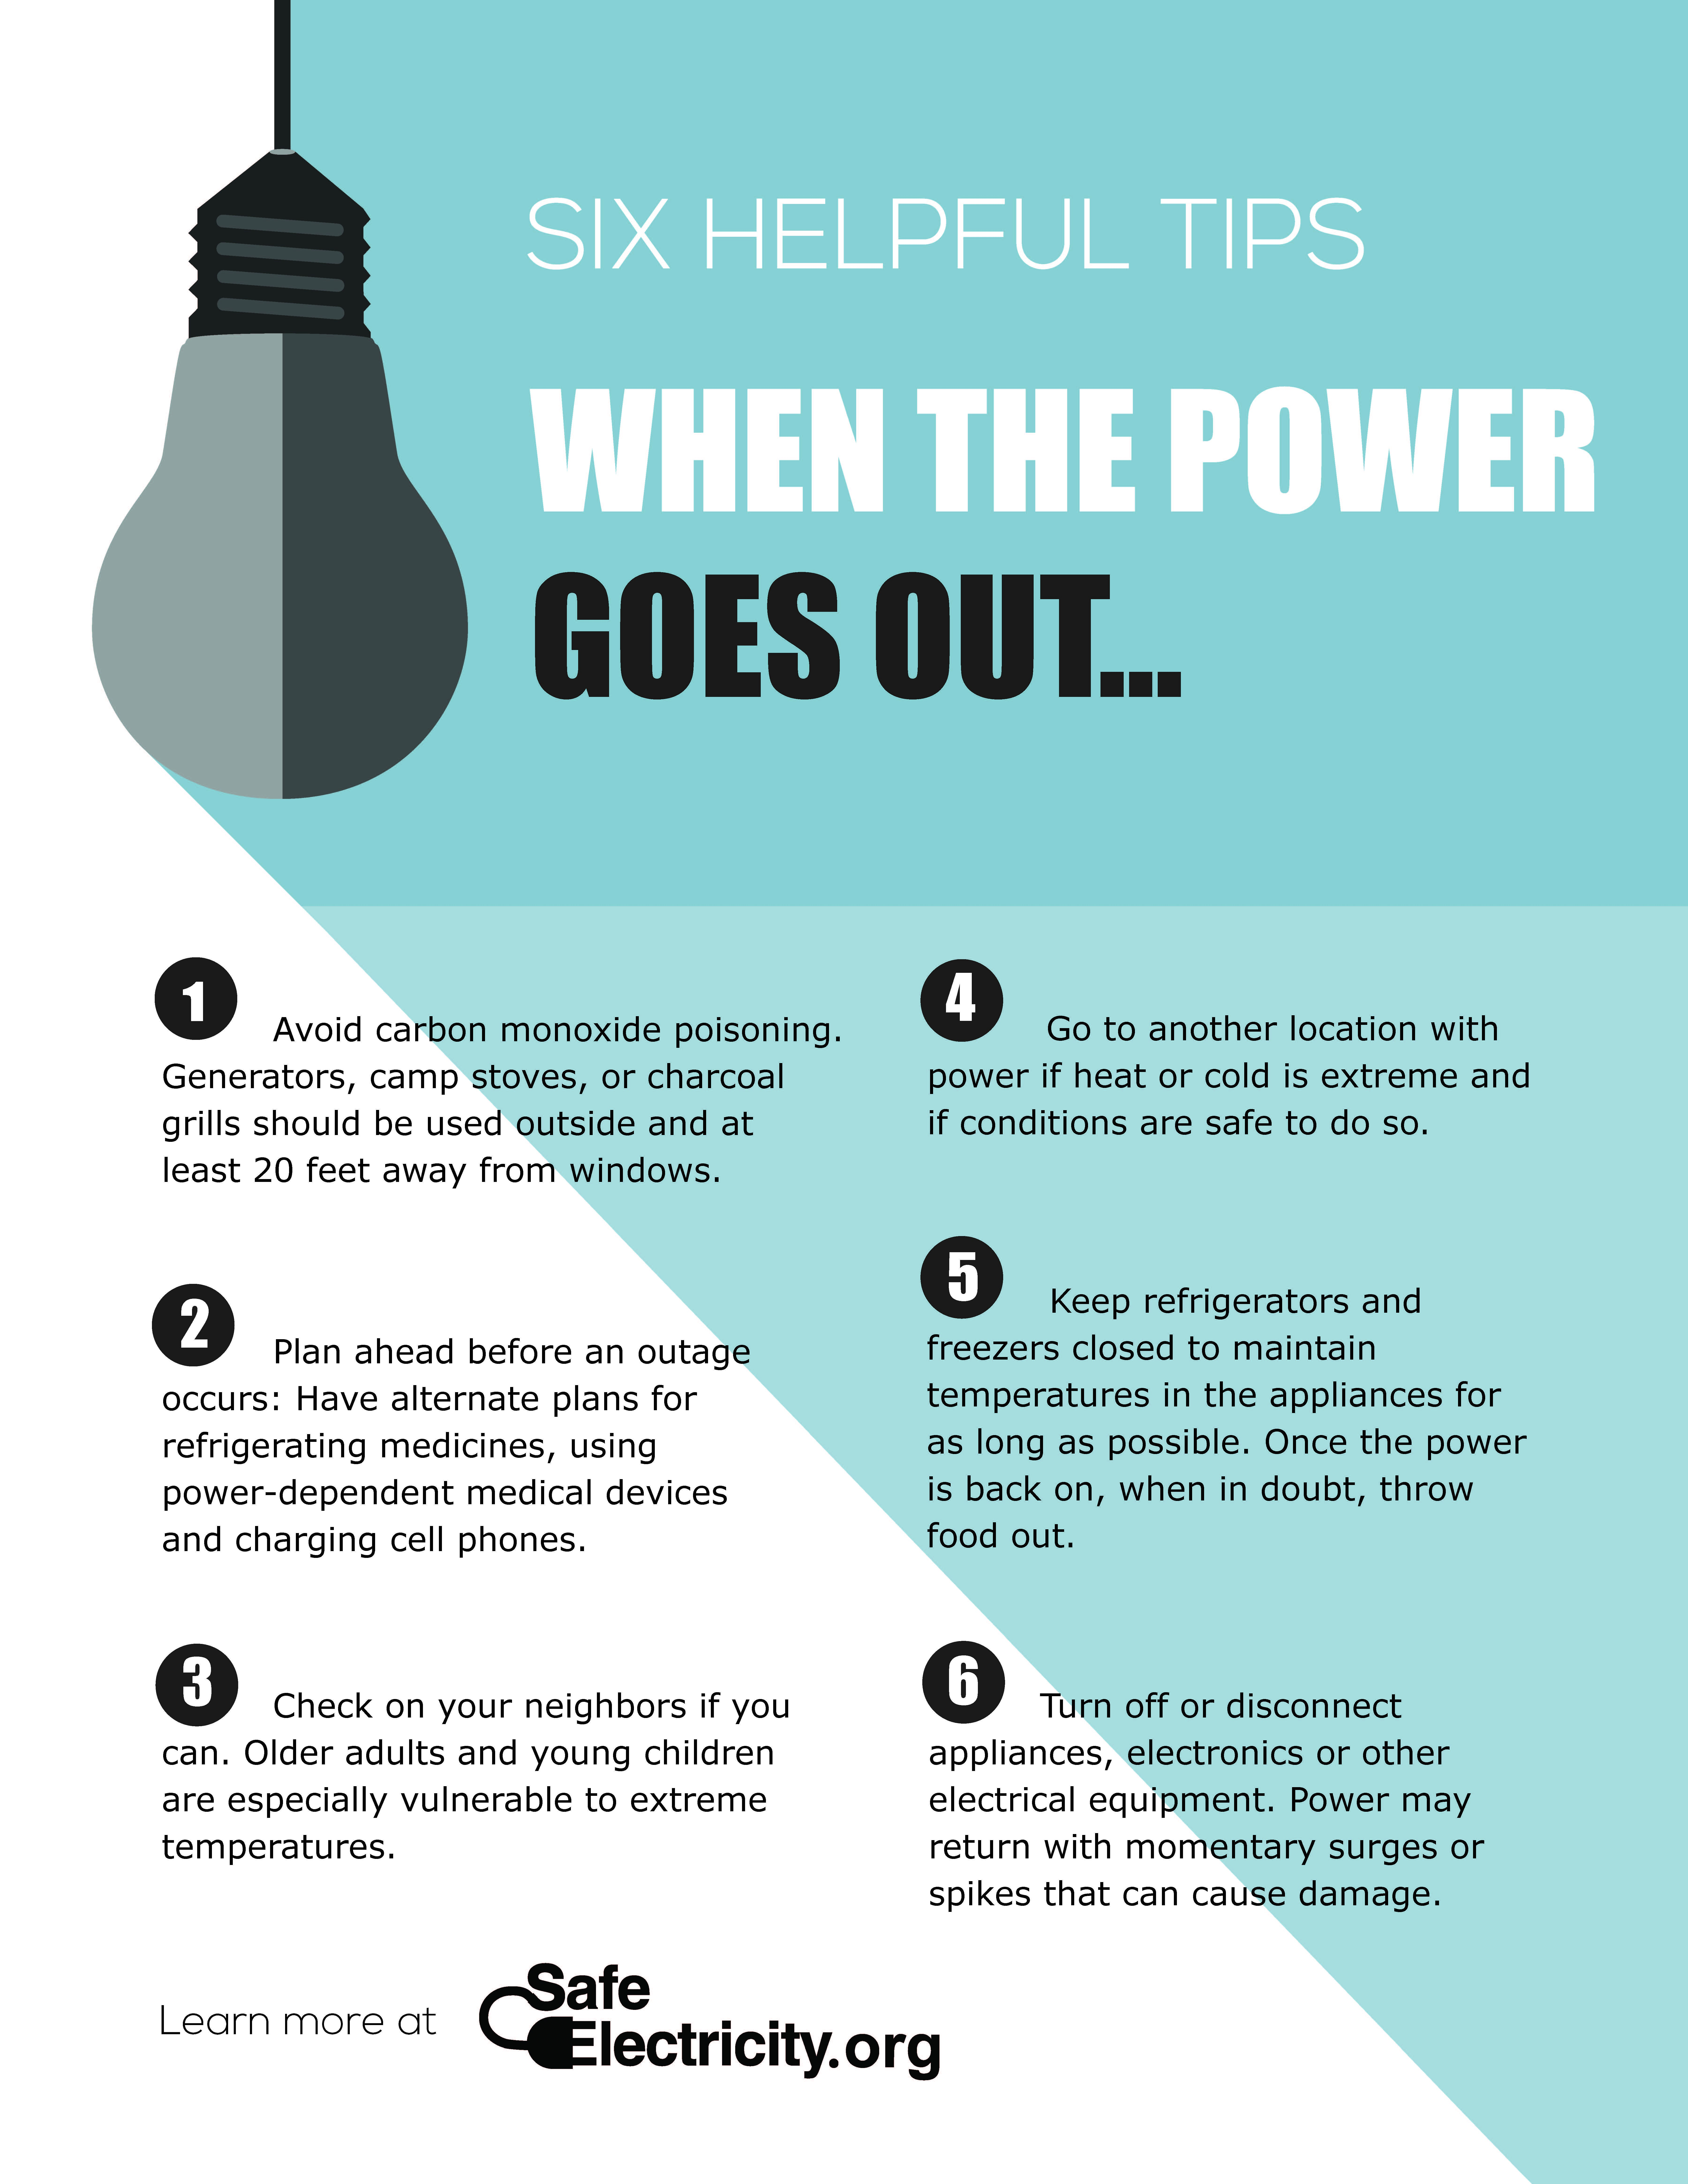 Tips for Being Prepared For a Power Outage